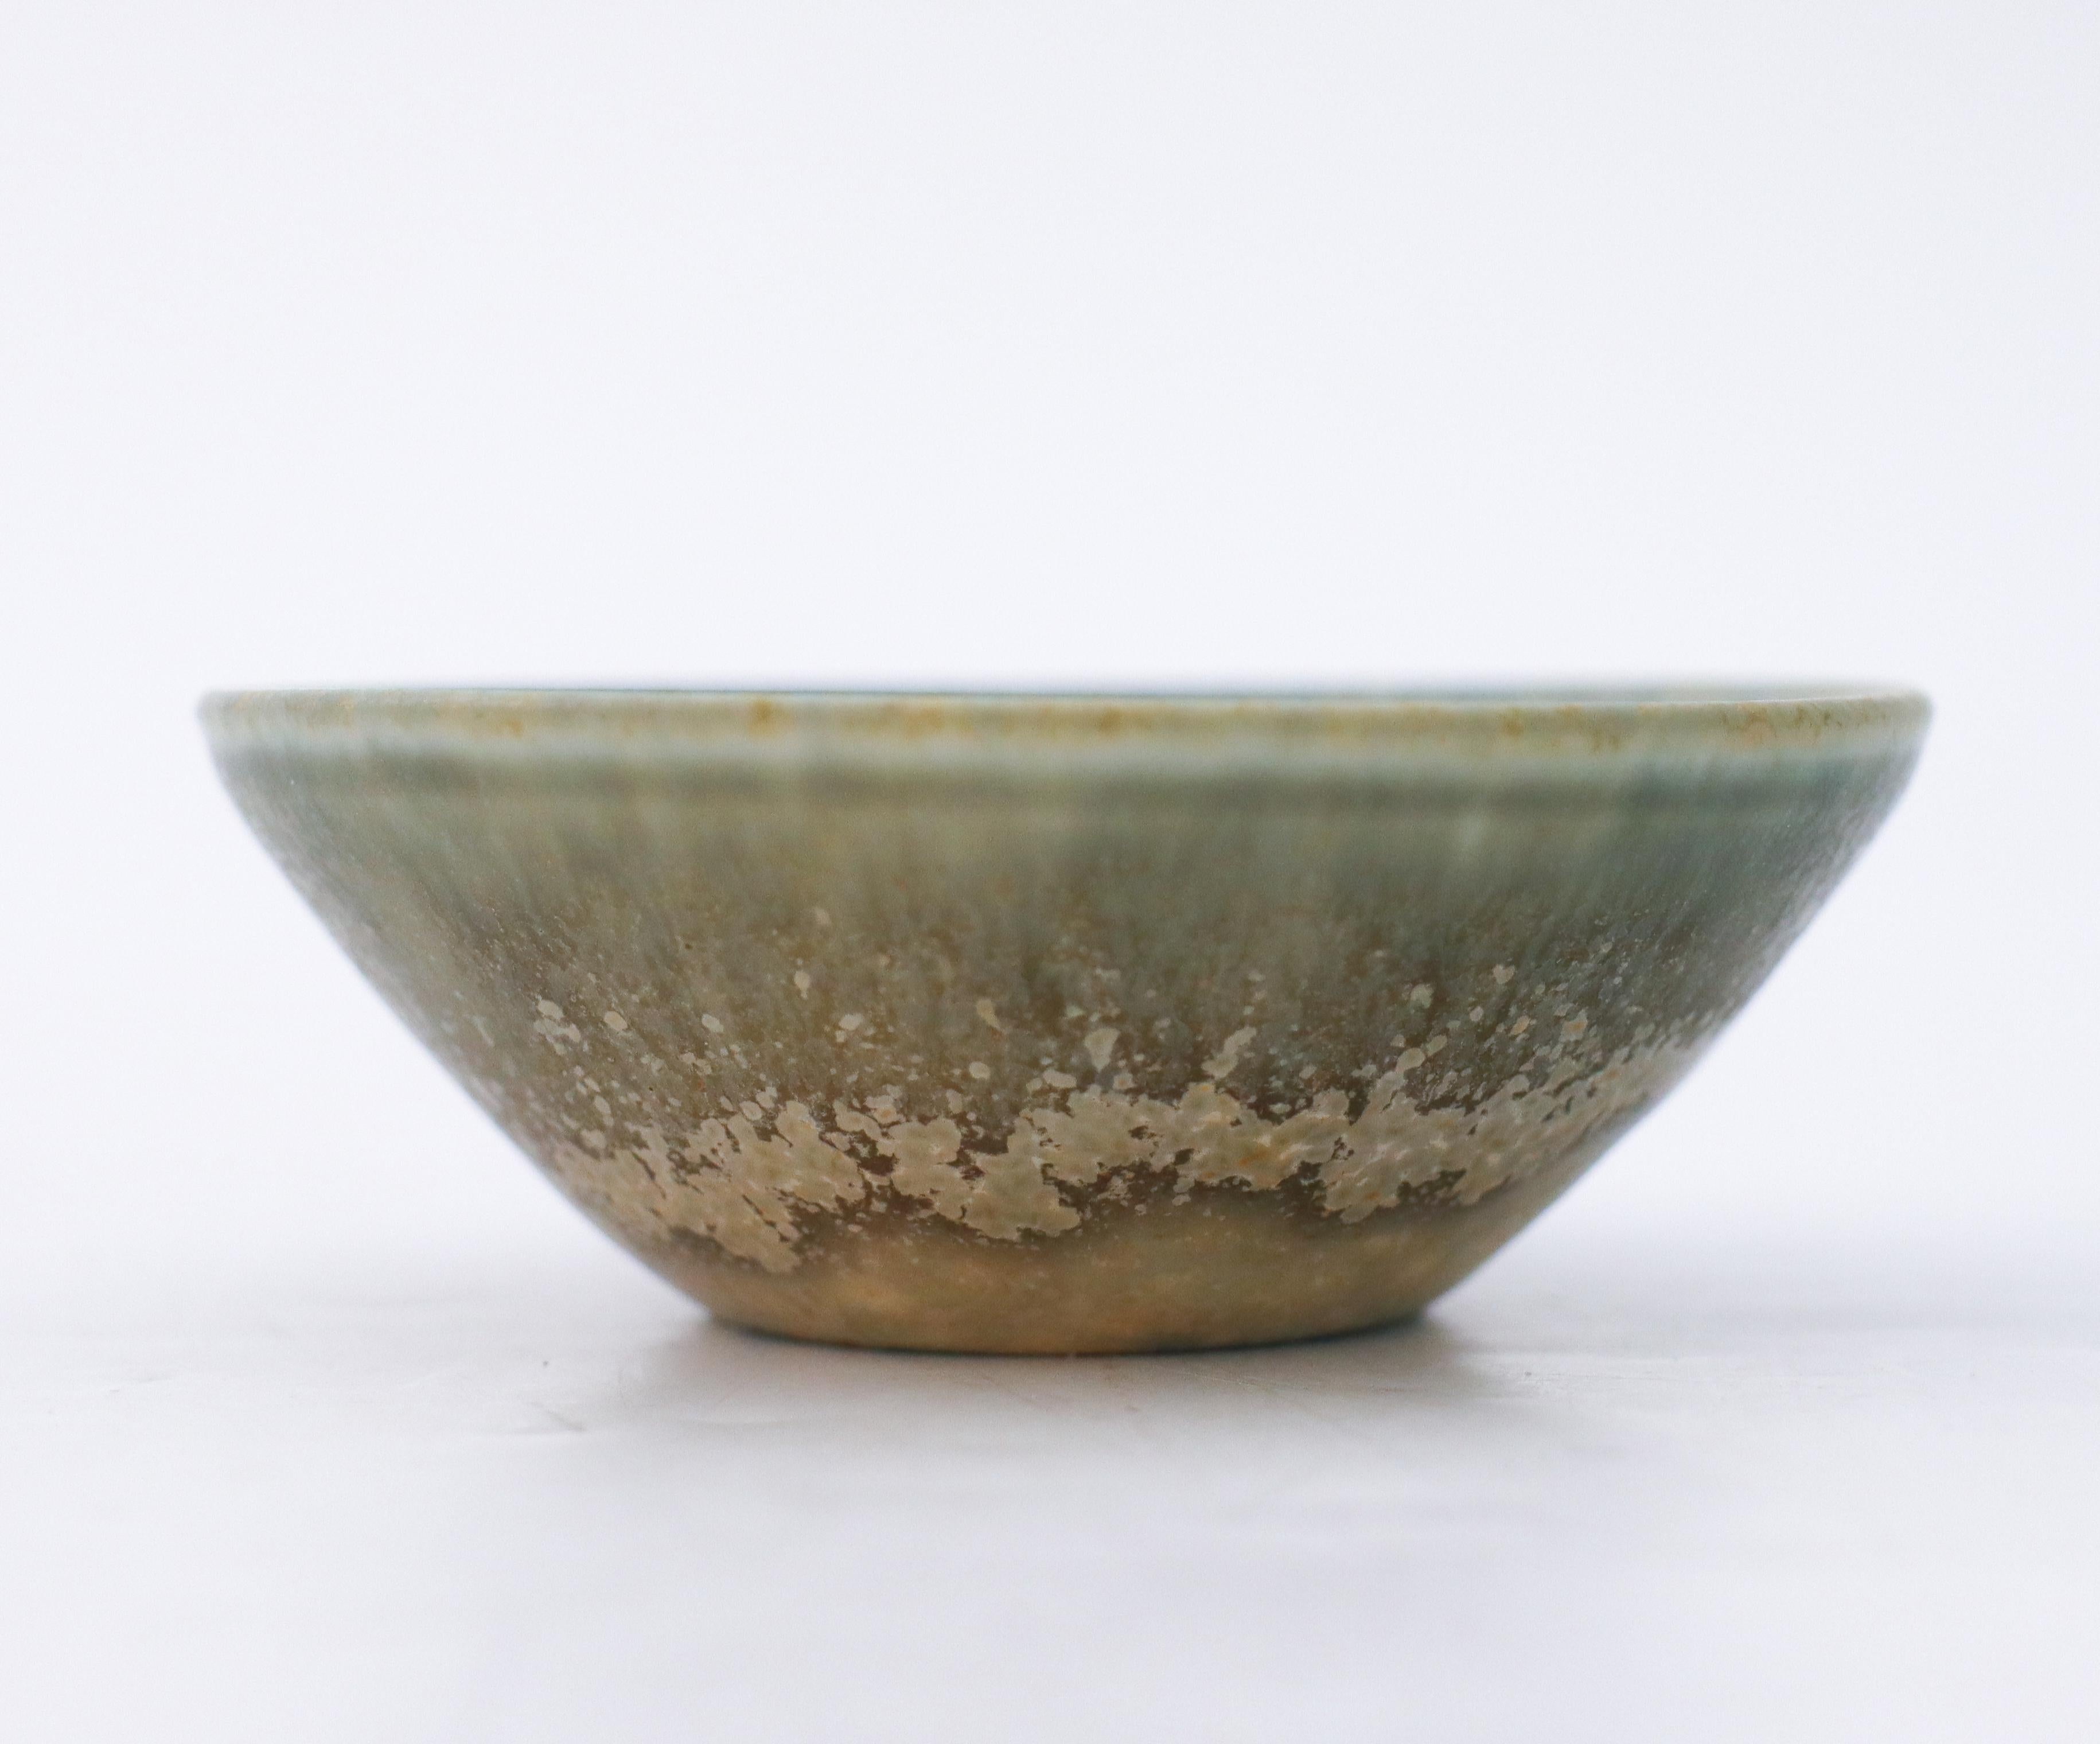 A round, small bowl with a lovely glaze designed by Carl-Harry Stålhane at Rörstrand. It´s 8.5 cm (3.4